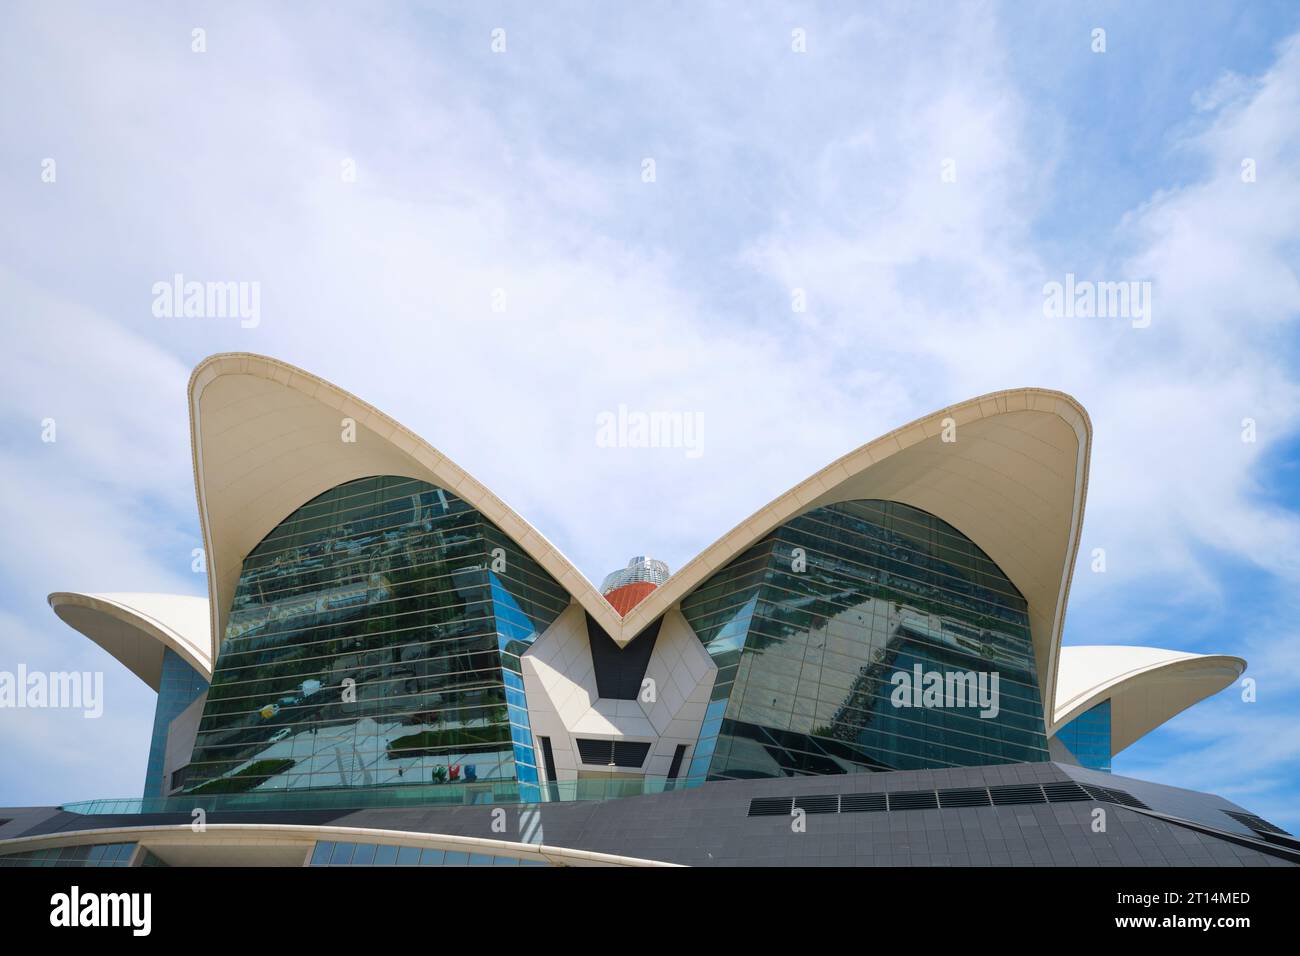 Iconsiam,Thailand -Oct 30,2019: People can seen exploring around Iconsiam  shopping mall,it is offers high-end brands, an indoor floating market in it  Stock Photo - Alamy